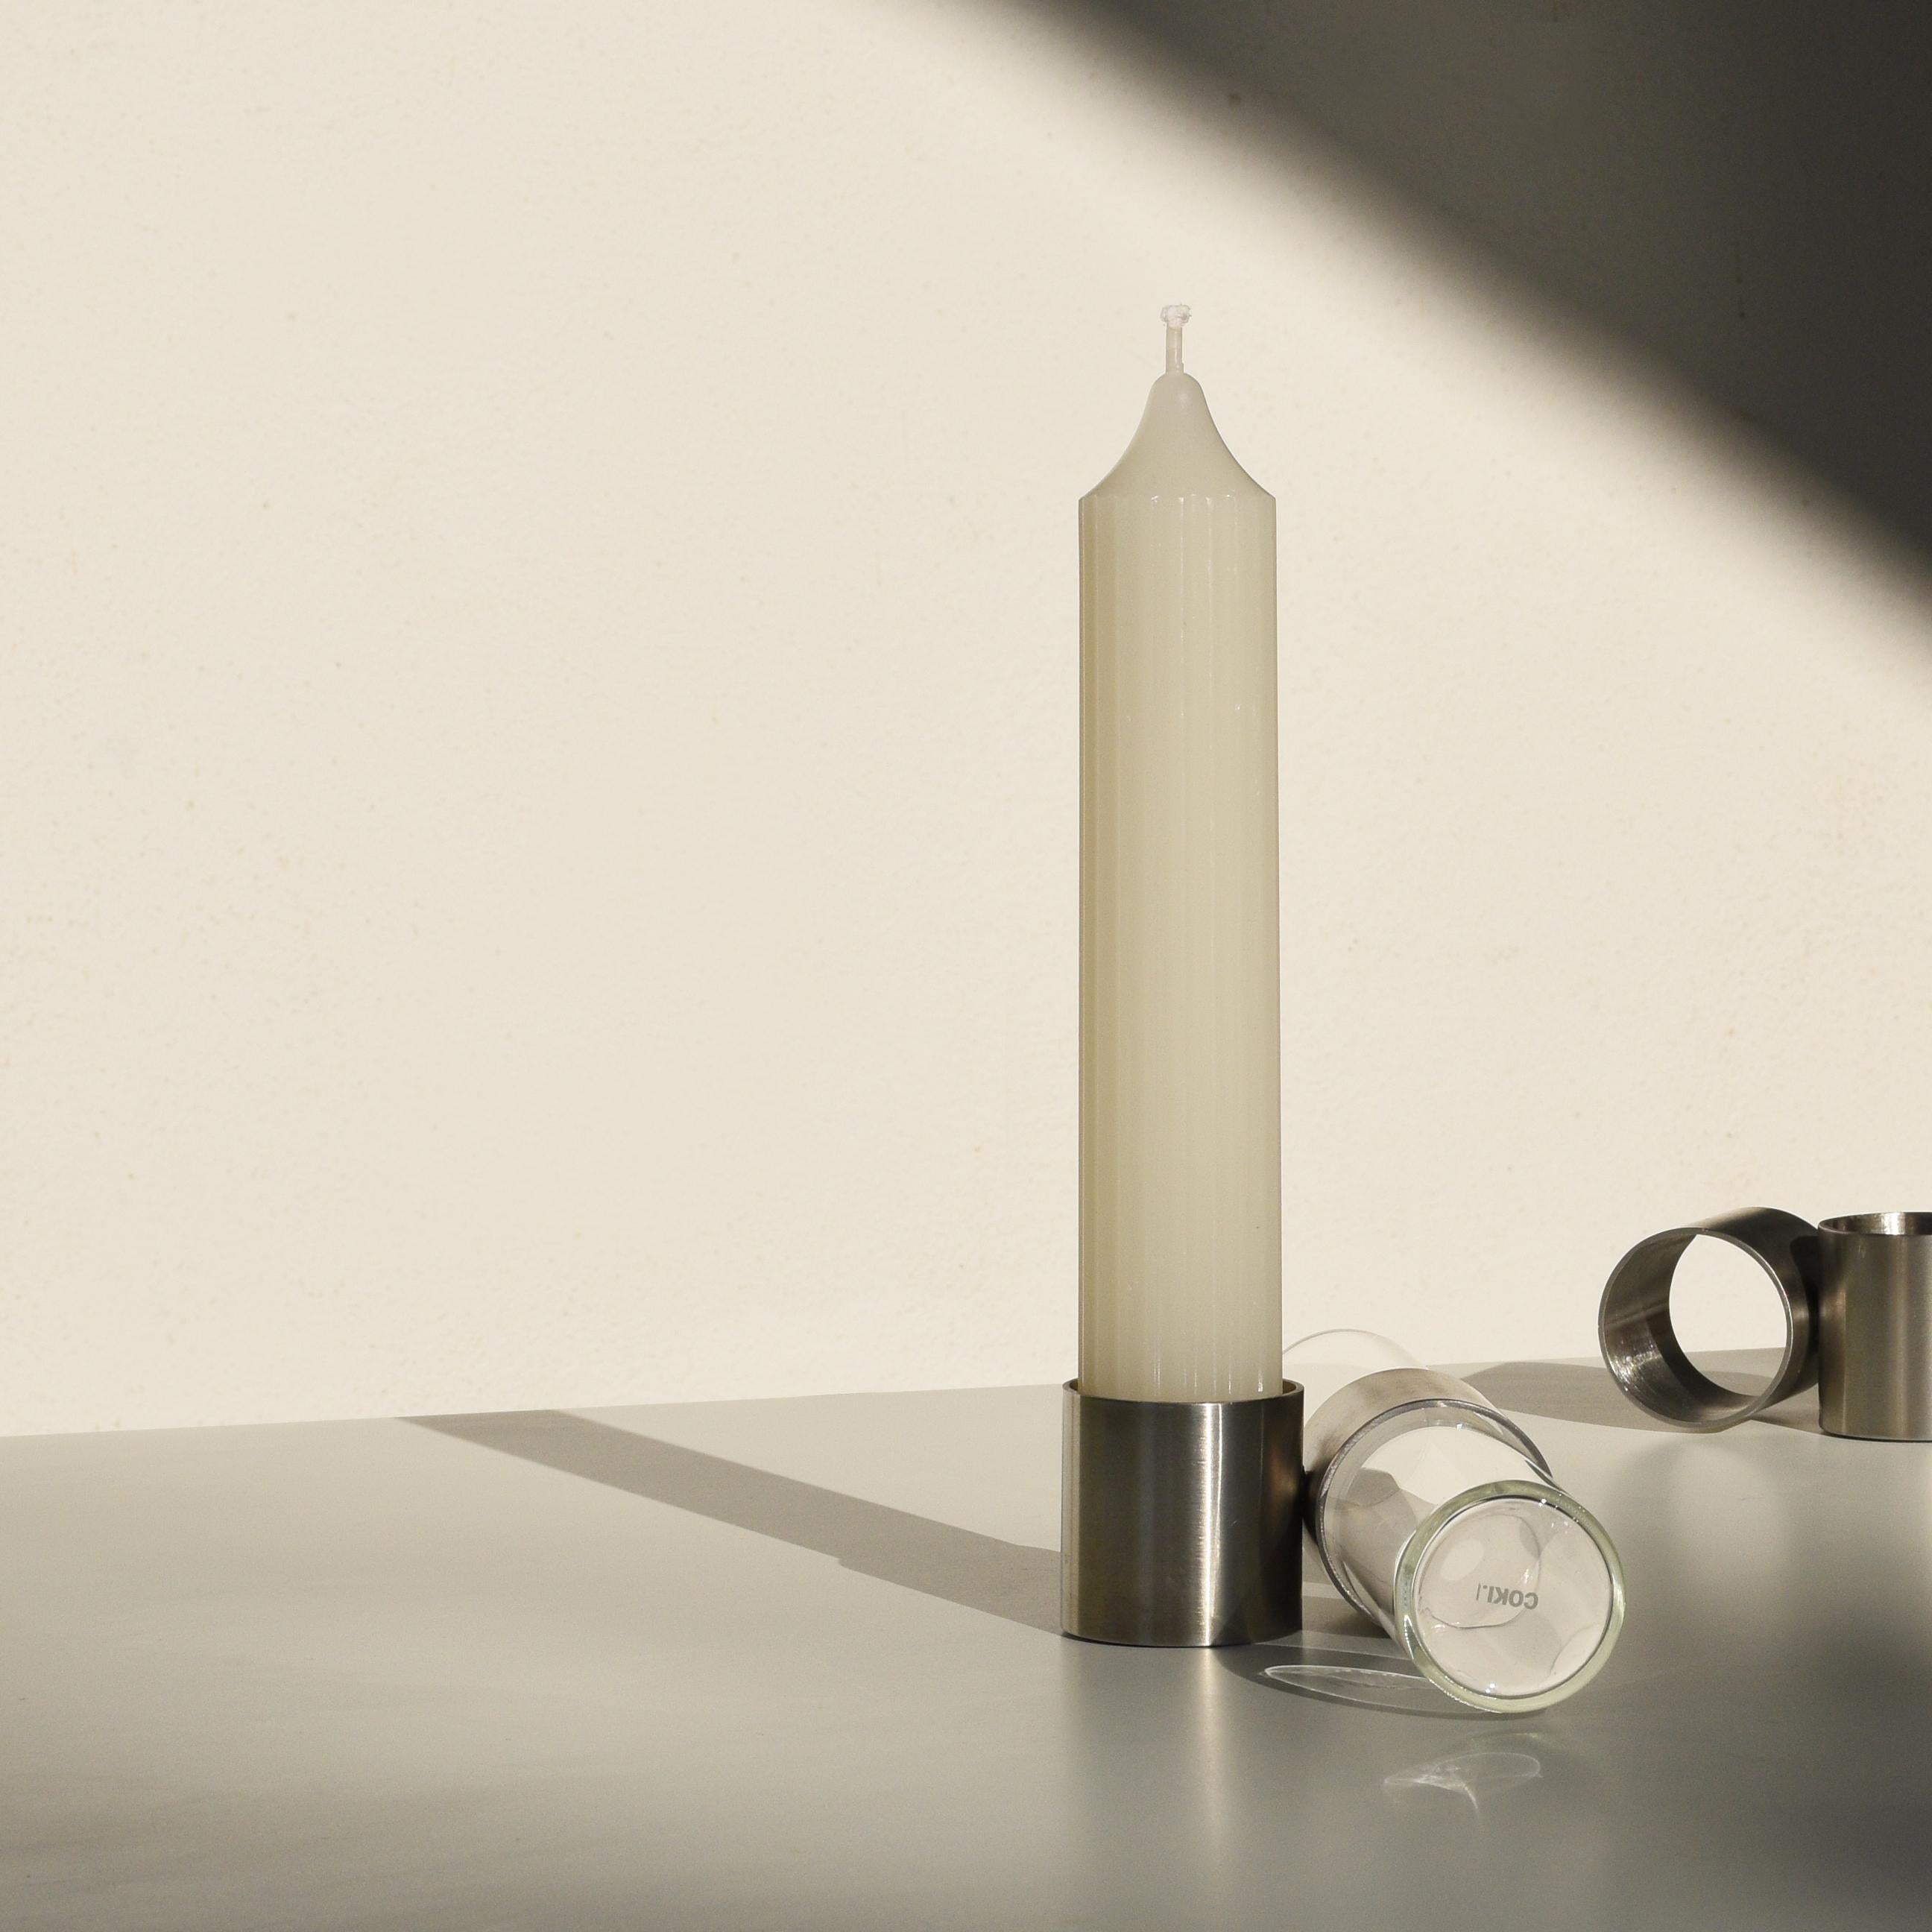 Candle holder and flower vase in a single object, Tempio del Tempo was conceived as a small altar for the home, created through the union of simple and symbolic shapes that fit together without connections and remain divisible: two stainless steel